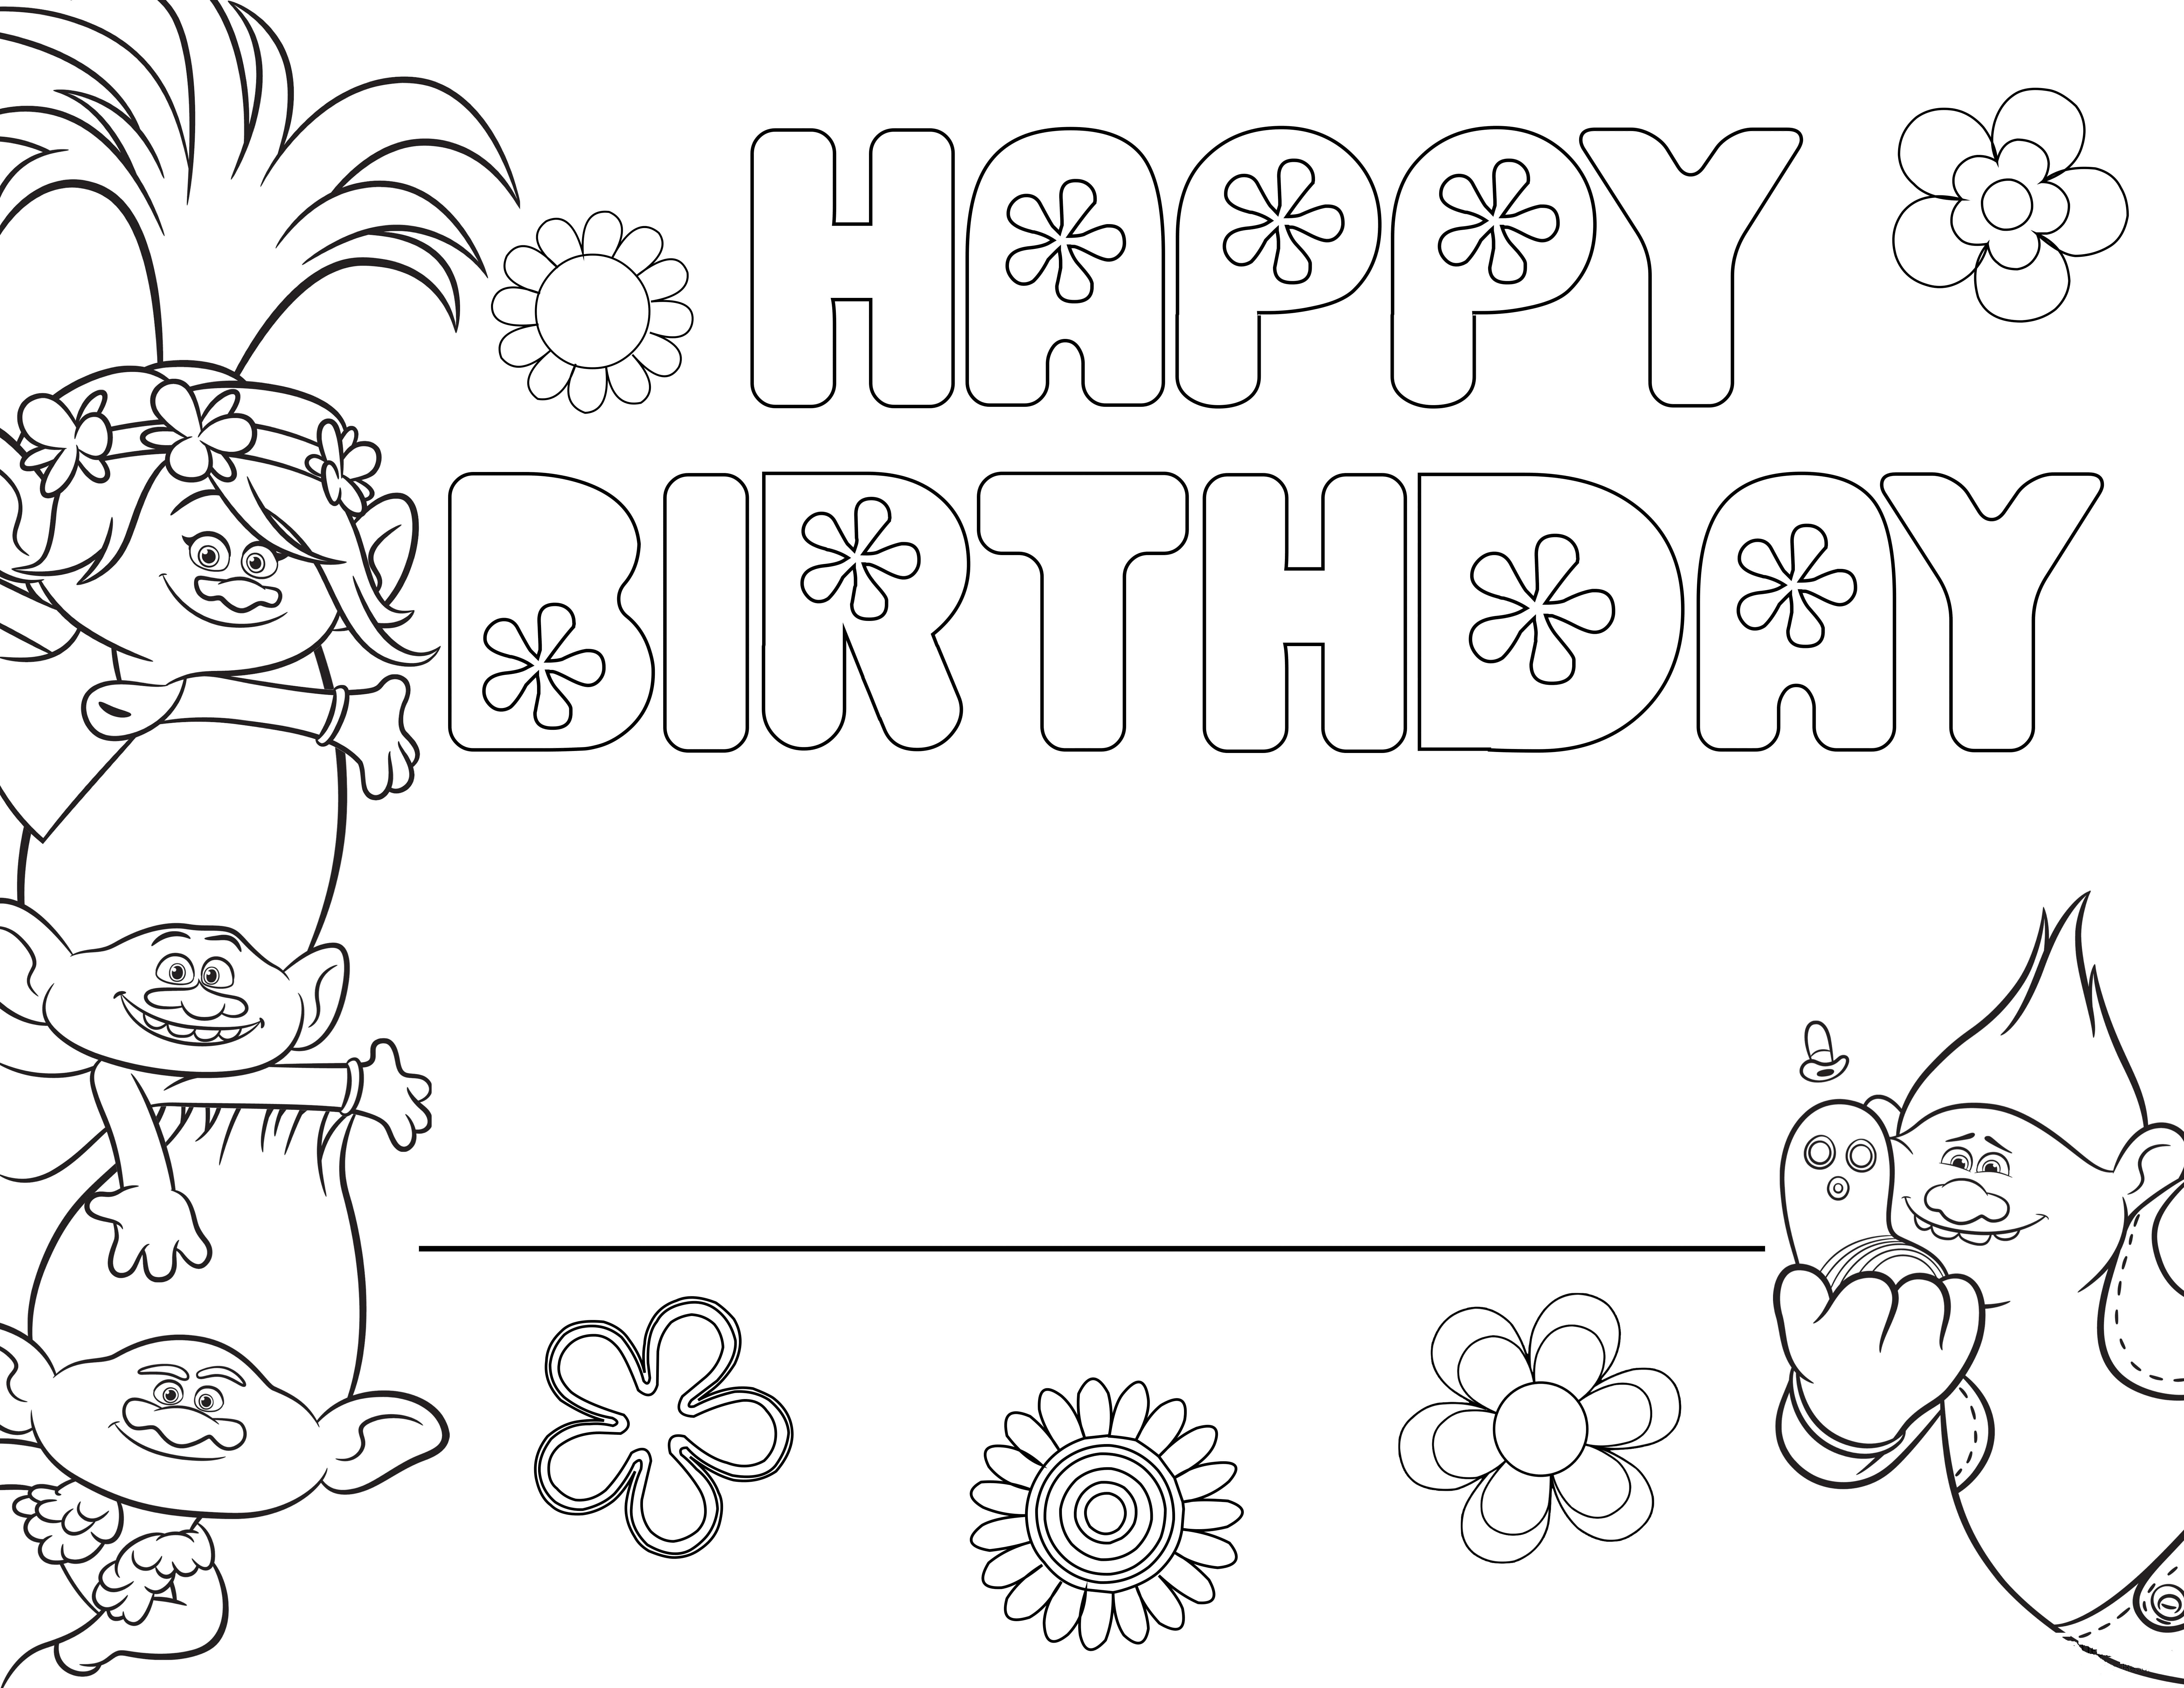 Happy Birthday Coloring Card. New collection 5. Free Printable